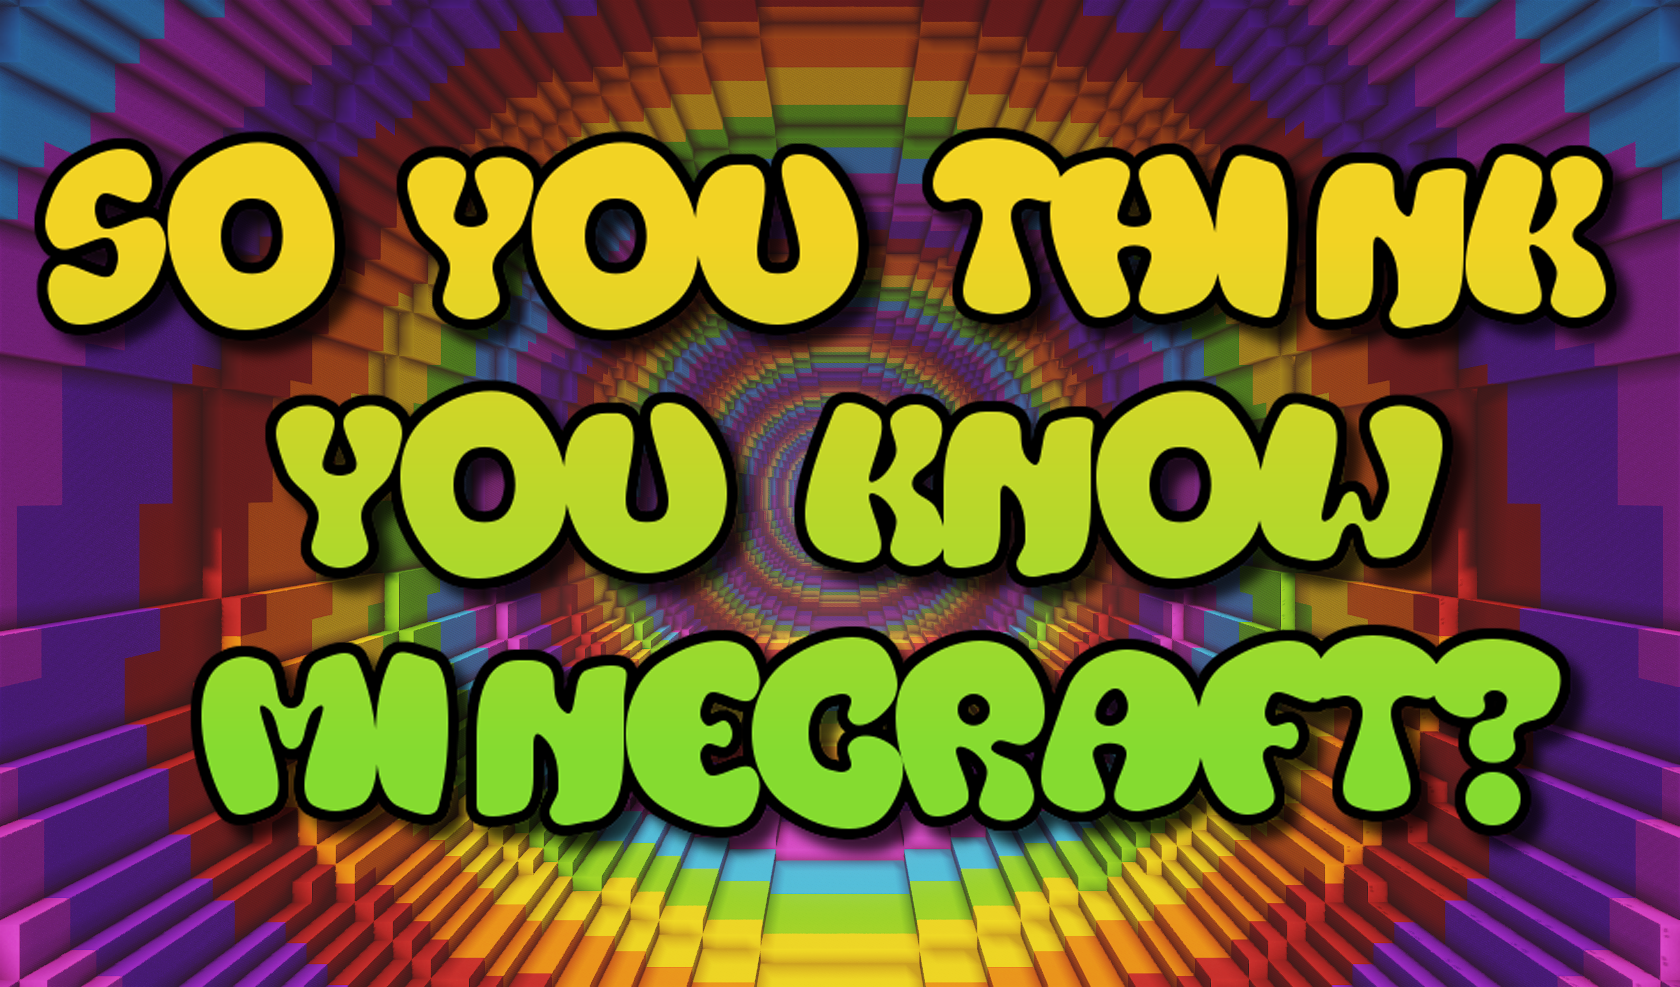 Download So You Think You Know Minecraft? for Minecraft 1.16.4